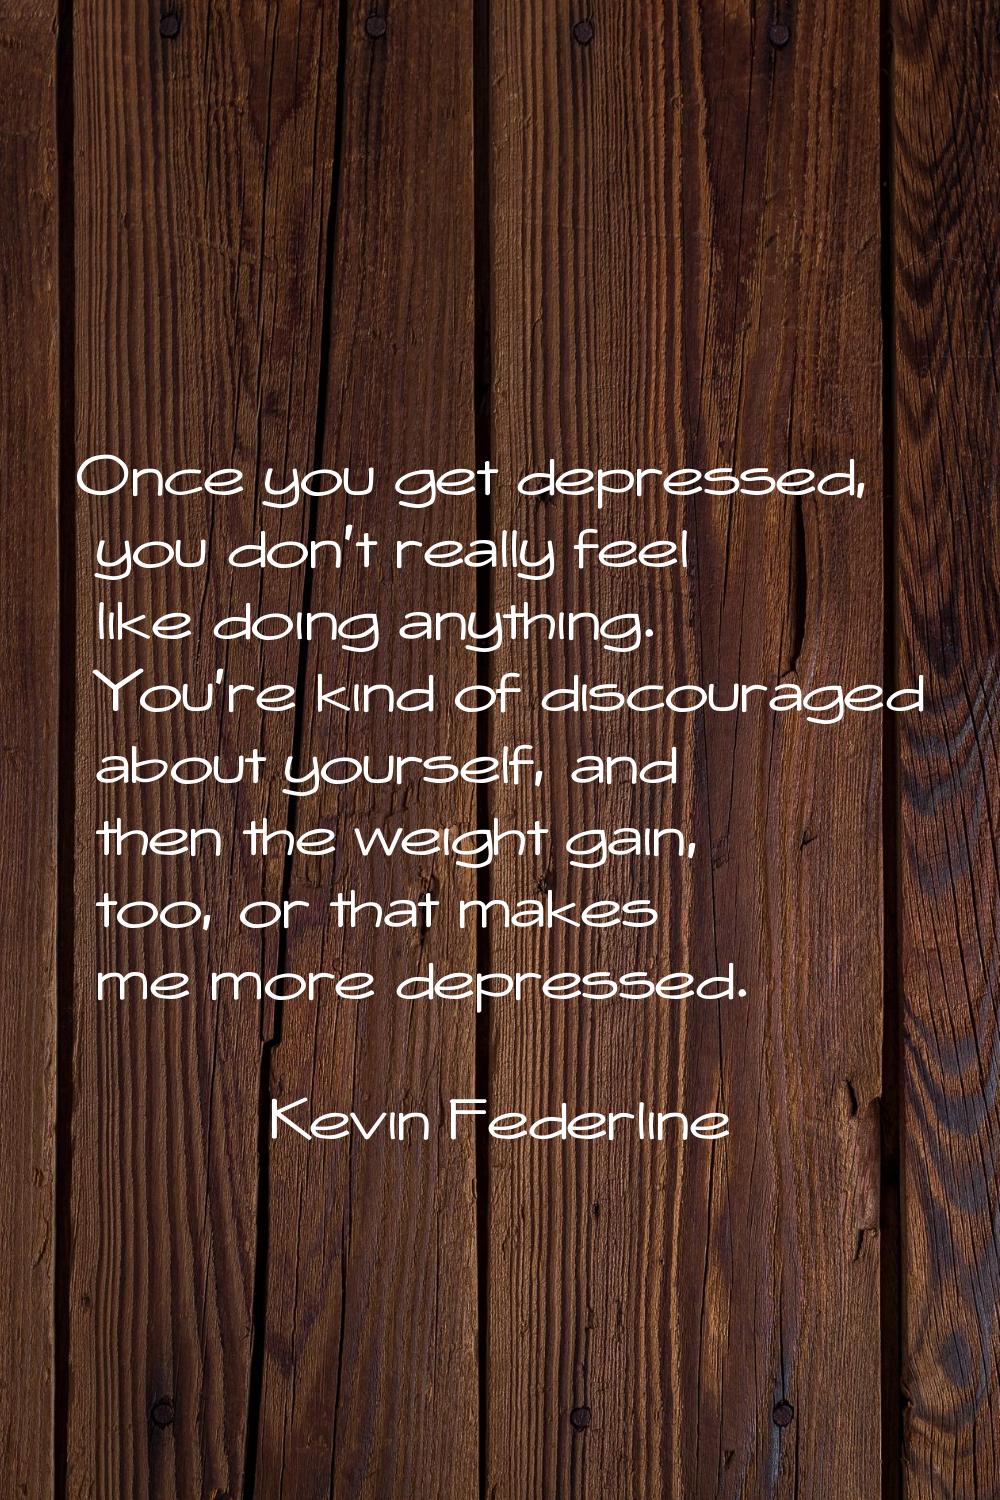 Once you get depressed, you don't really feel like doing anything. You're kind of discouraged about